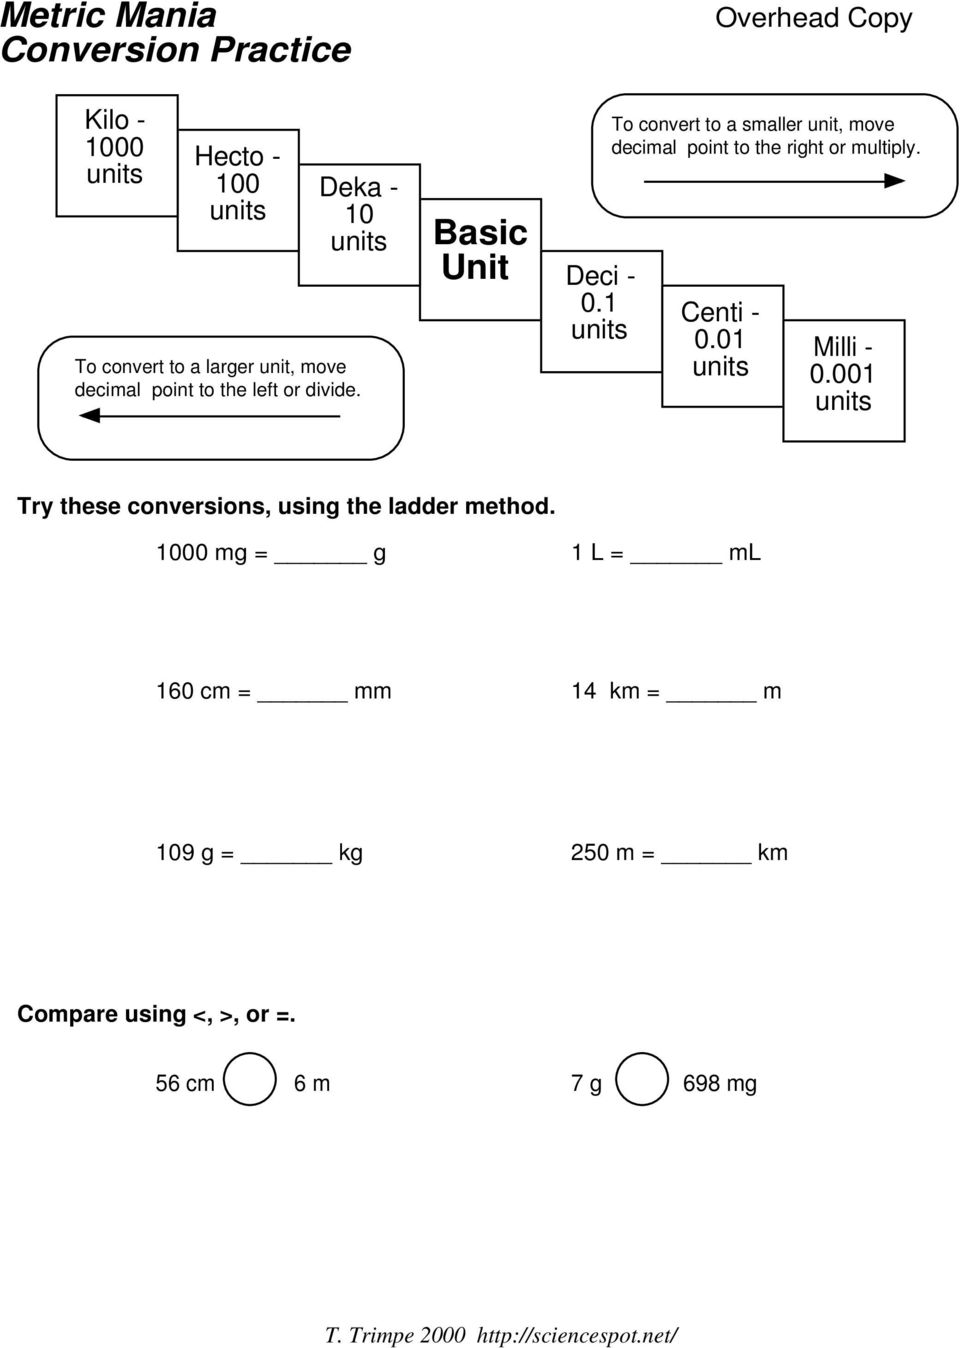 Metric Mania Conversion Practice. Basic Unit. Overhead Copy. Kilo Within English To Metric Conversion Worksheet